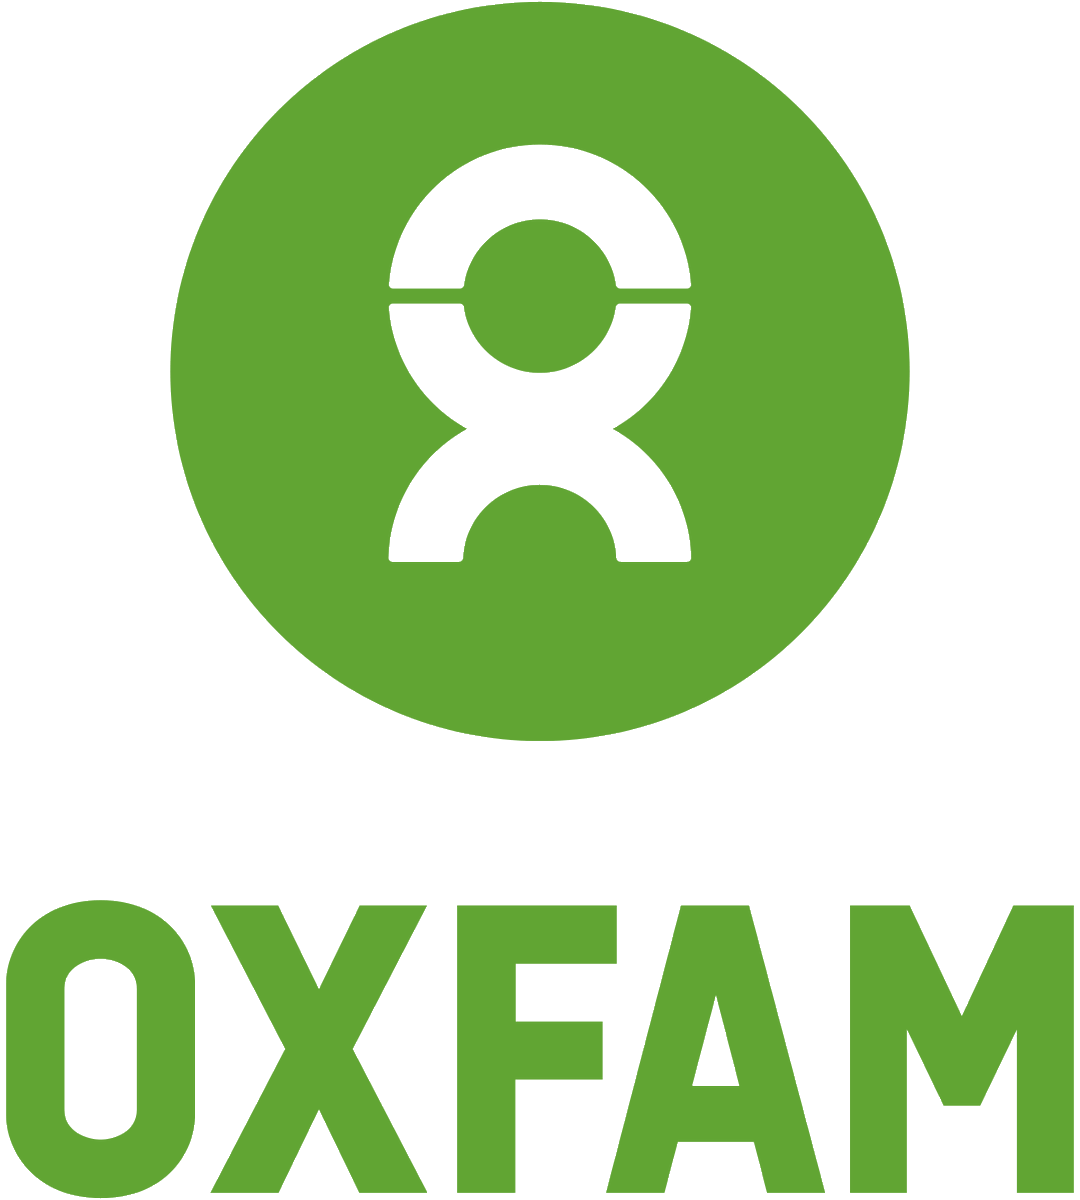 Exciting news! @oxfamgb will be showcasing their impactful work at The UK Careers Fair in London. This is your chance to be part of a team that fights poverty and helps save lives around the globe. Learn more at oxfam.org.uk. #Oxfam #CareersWithImpact